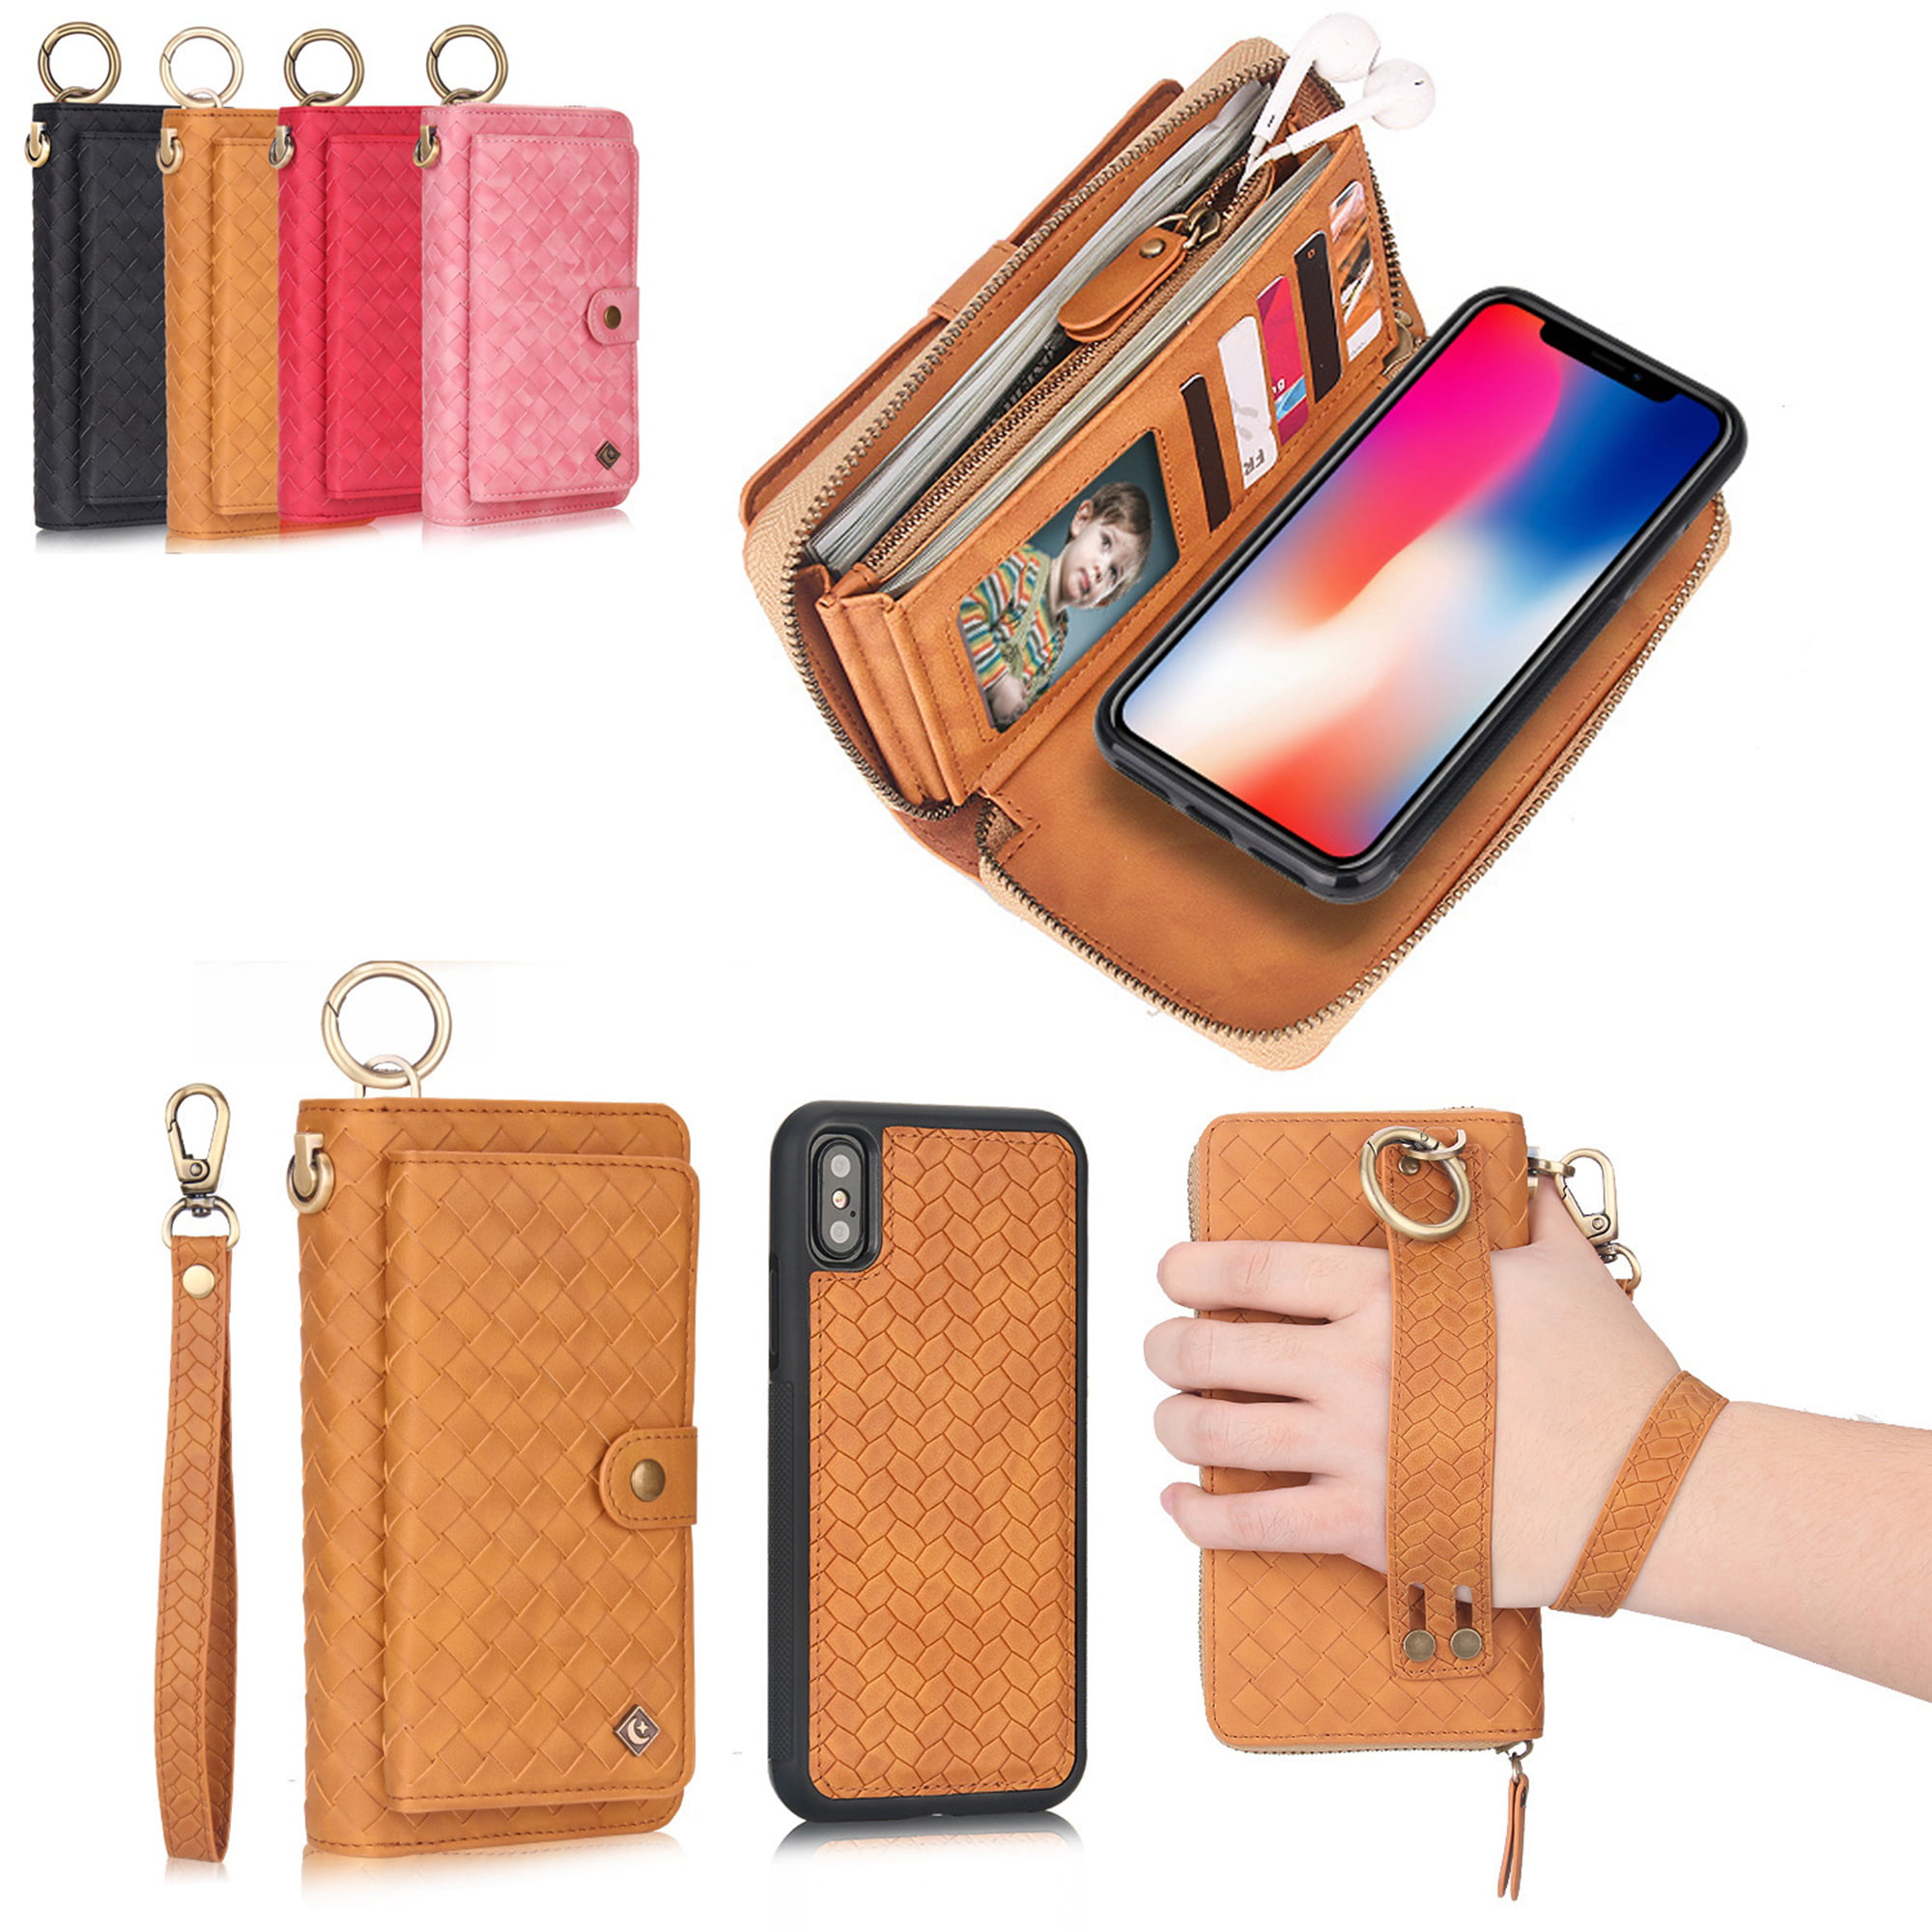 Jinghuash Leather Wallet Phone Case Compatible for iPhone XS Max,Premium Zipper Flip Wallet Case Cover With Credit Card Holder & Wrist Strap & Magnetic Closure for Girls Women,Rose Red 